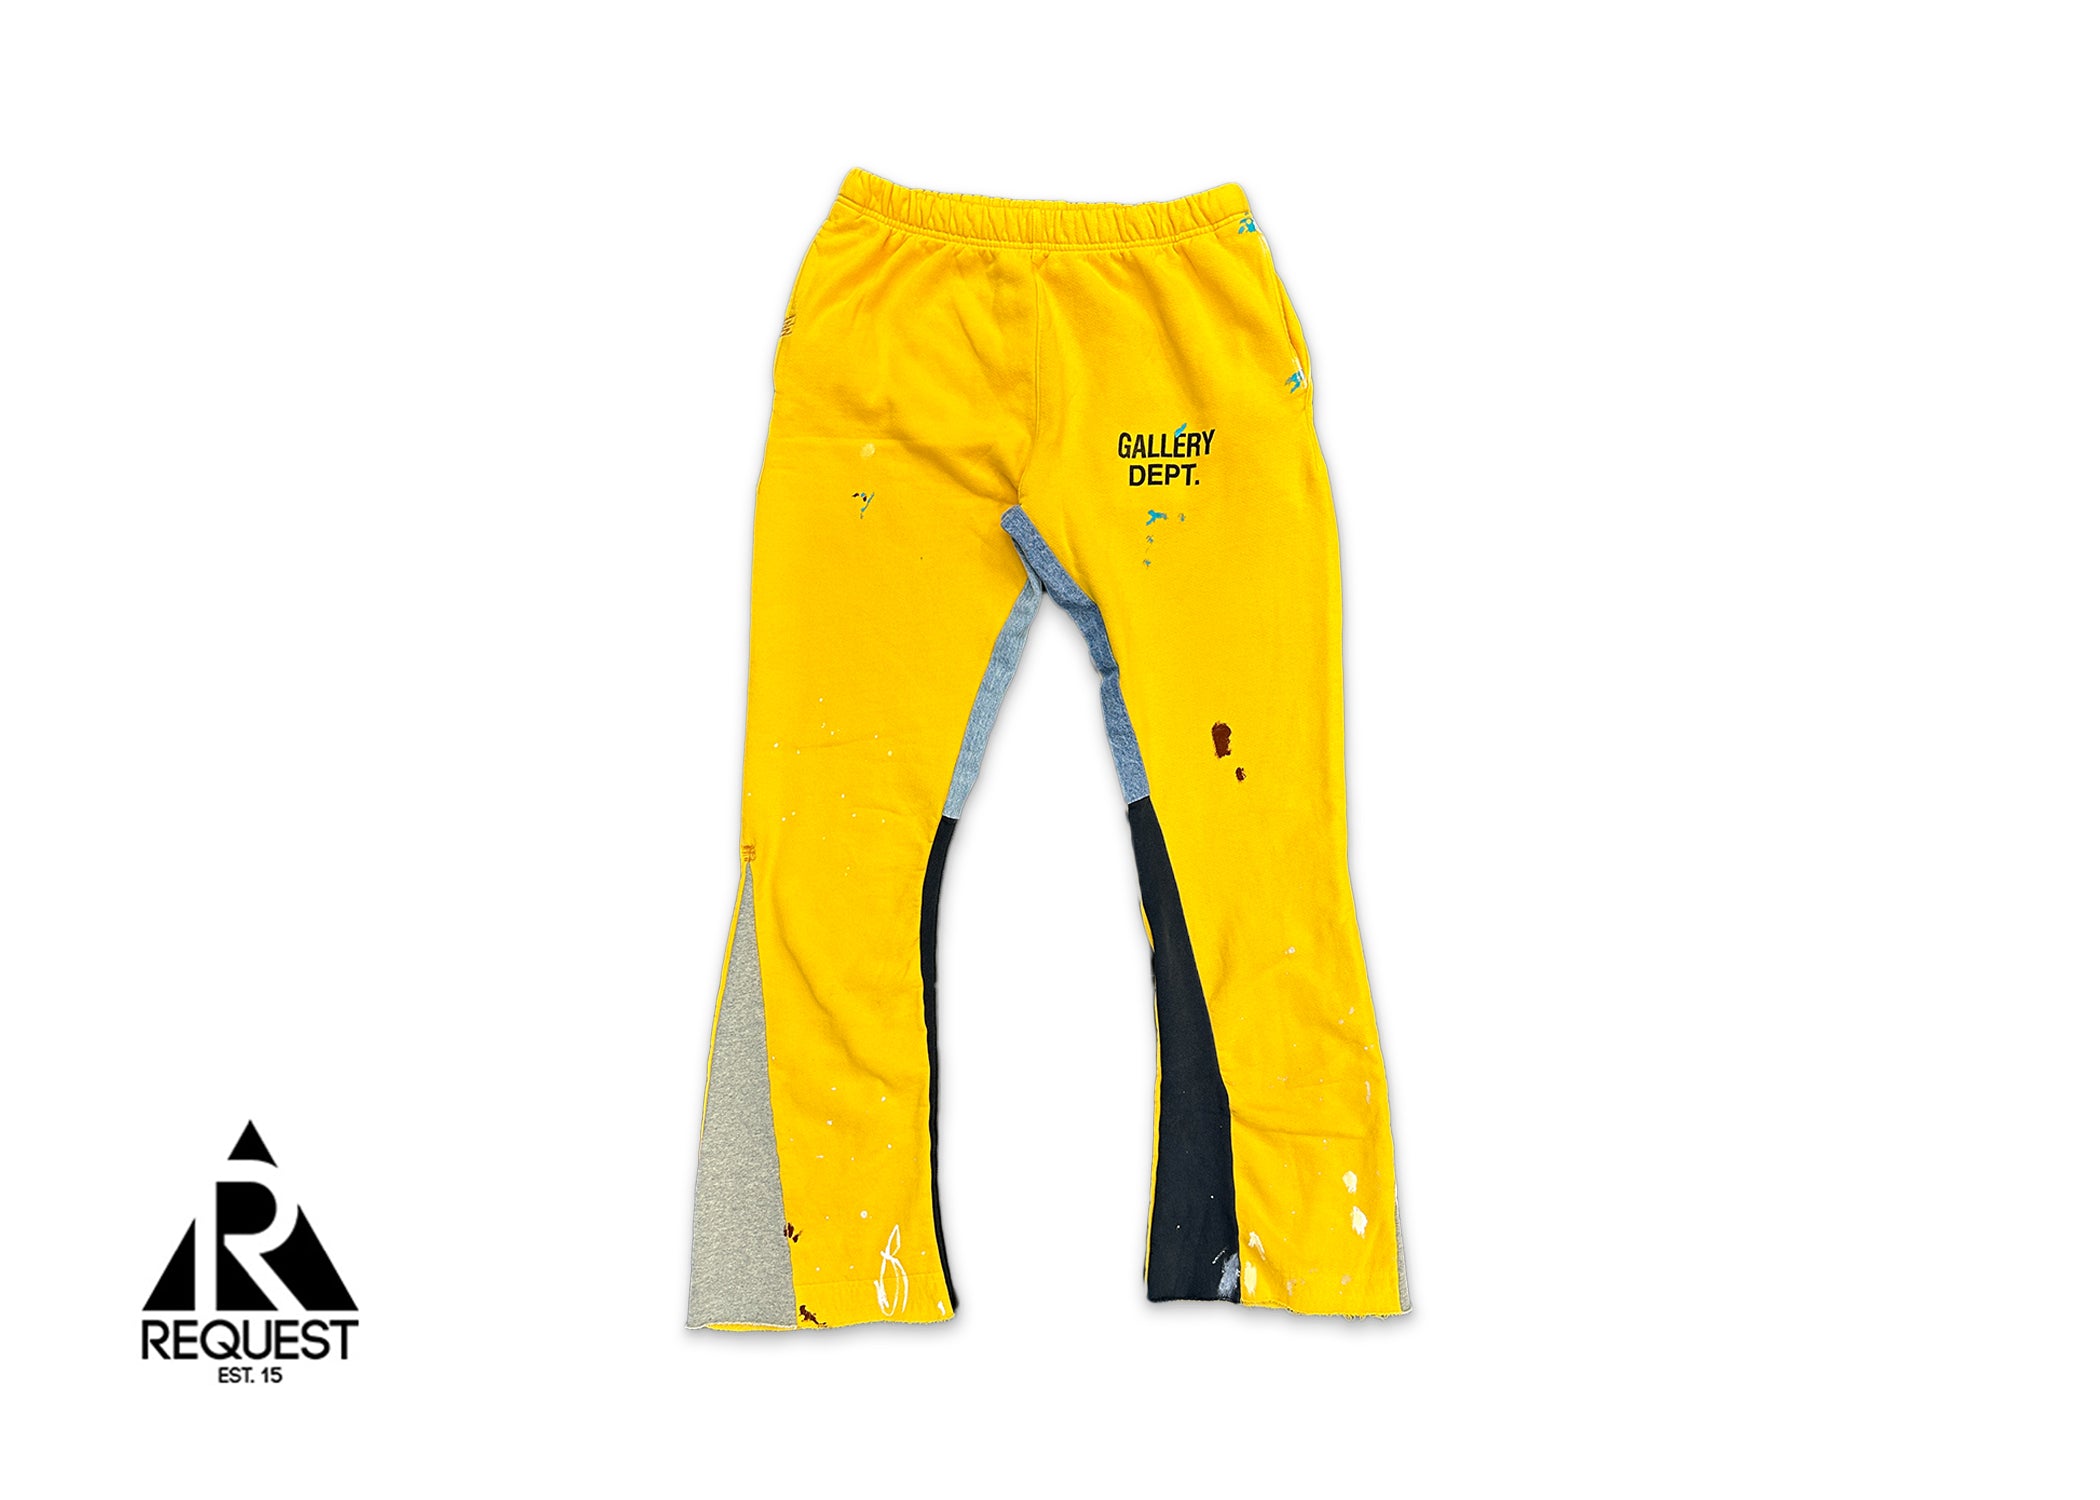 Gallery Dept. Flared Sweatpants "Yellow"